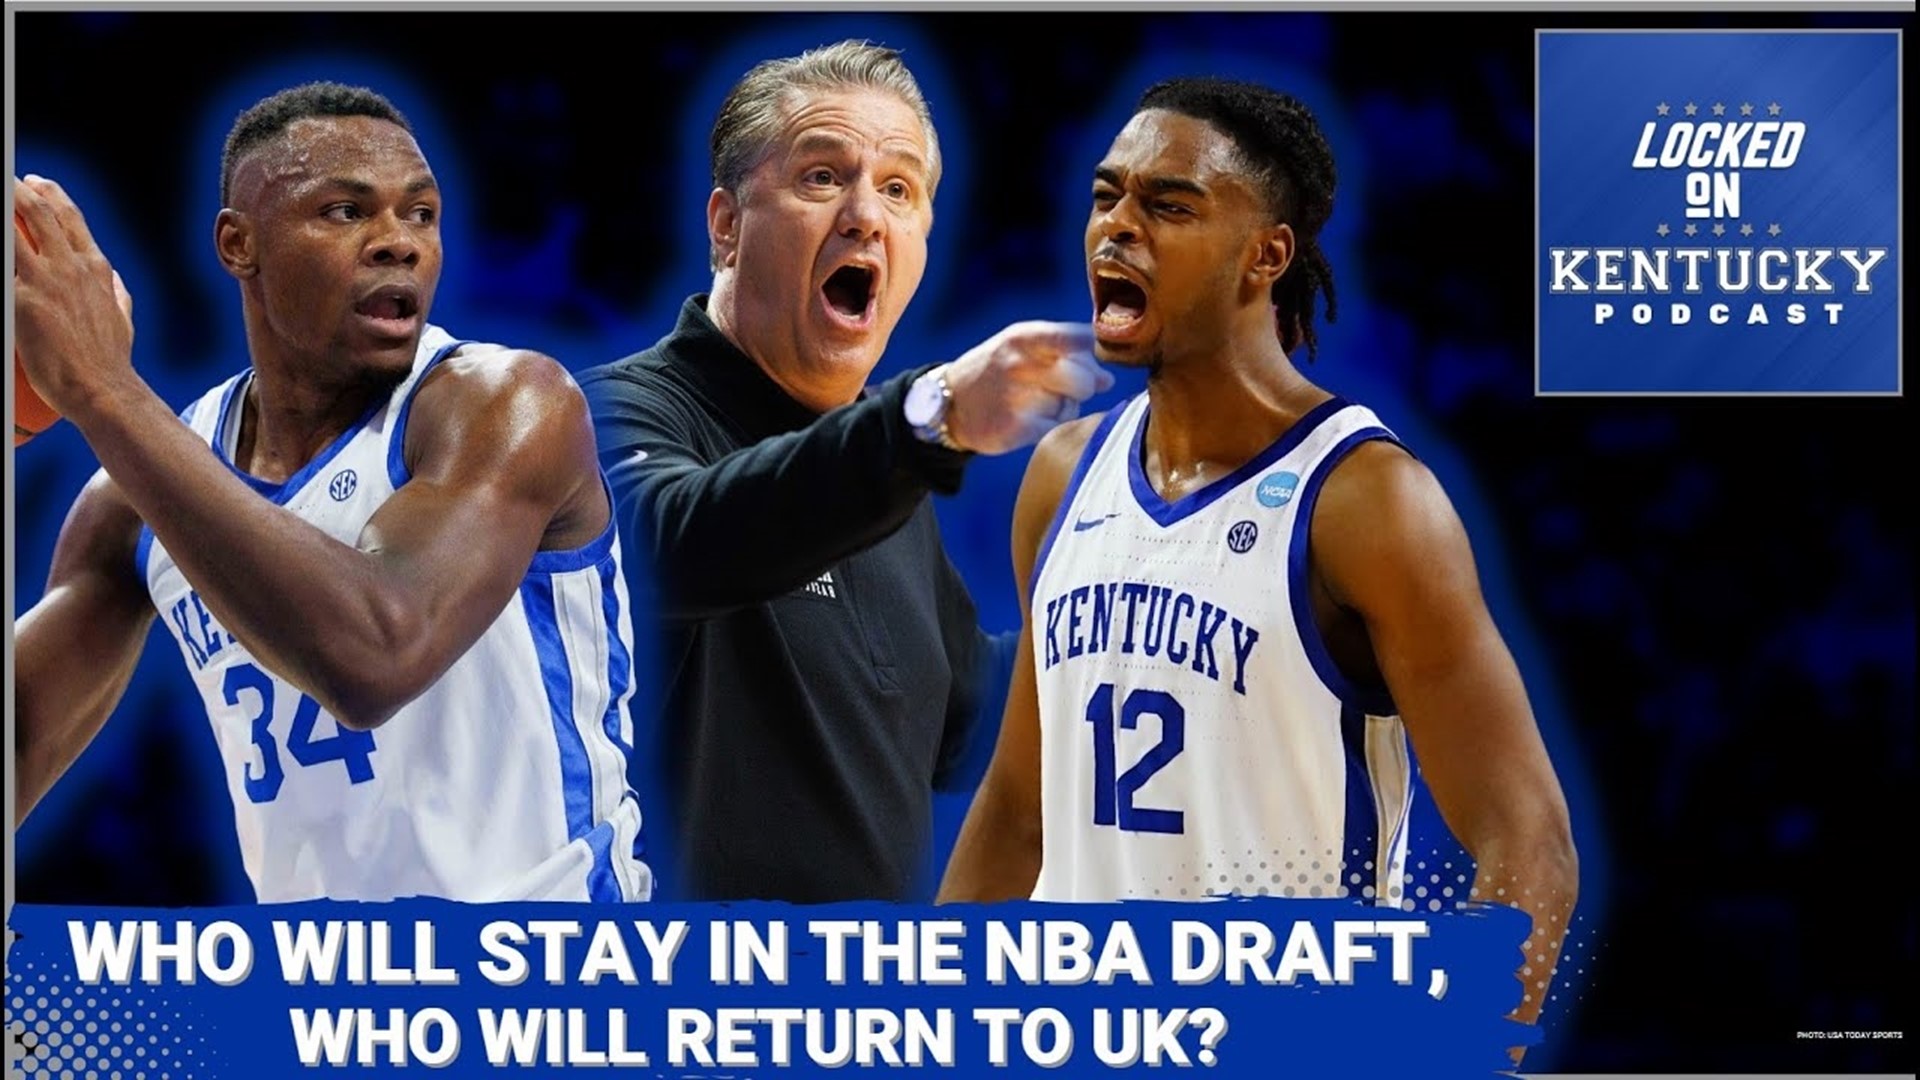 Kentucky basketball is currently waiting on Oscar Tshiebwe, Antonio Reeves and Chris Livingston to announce whether or not they are returning to play.